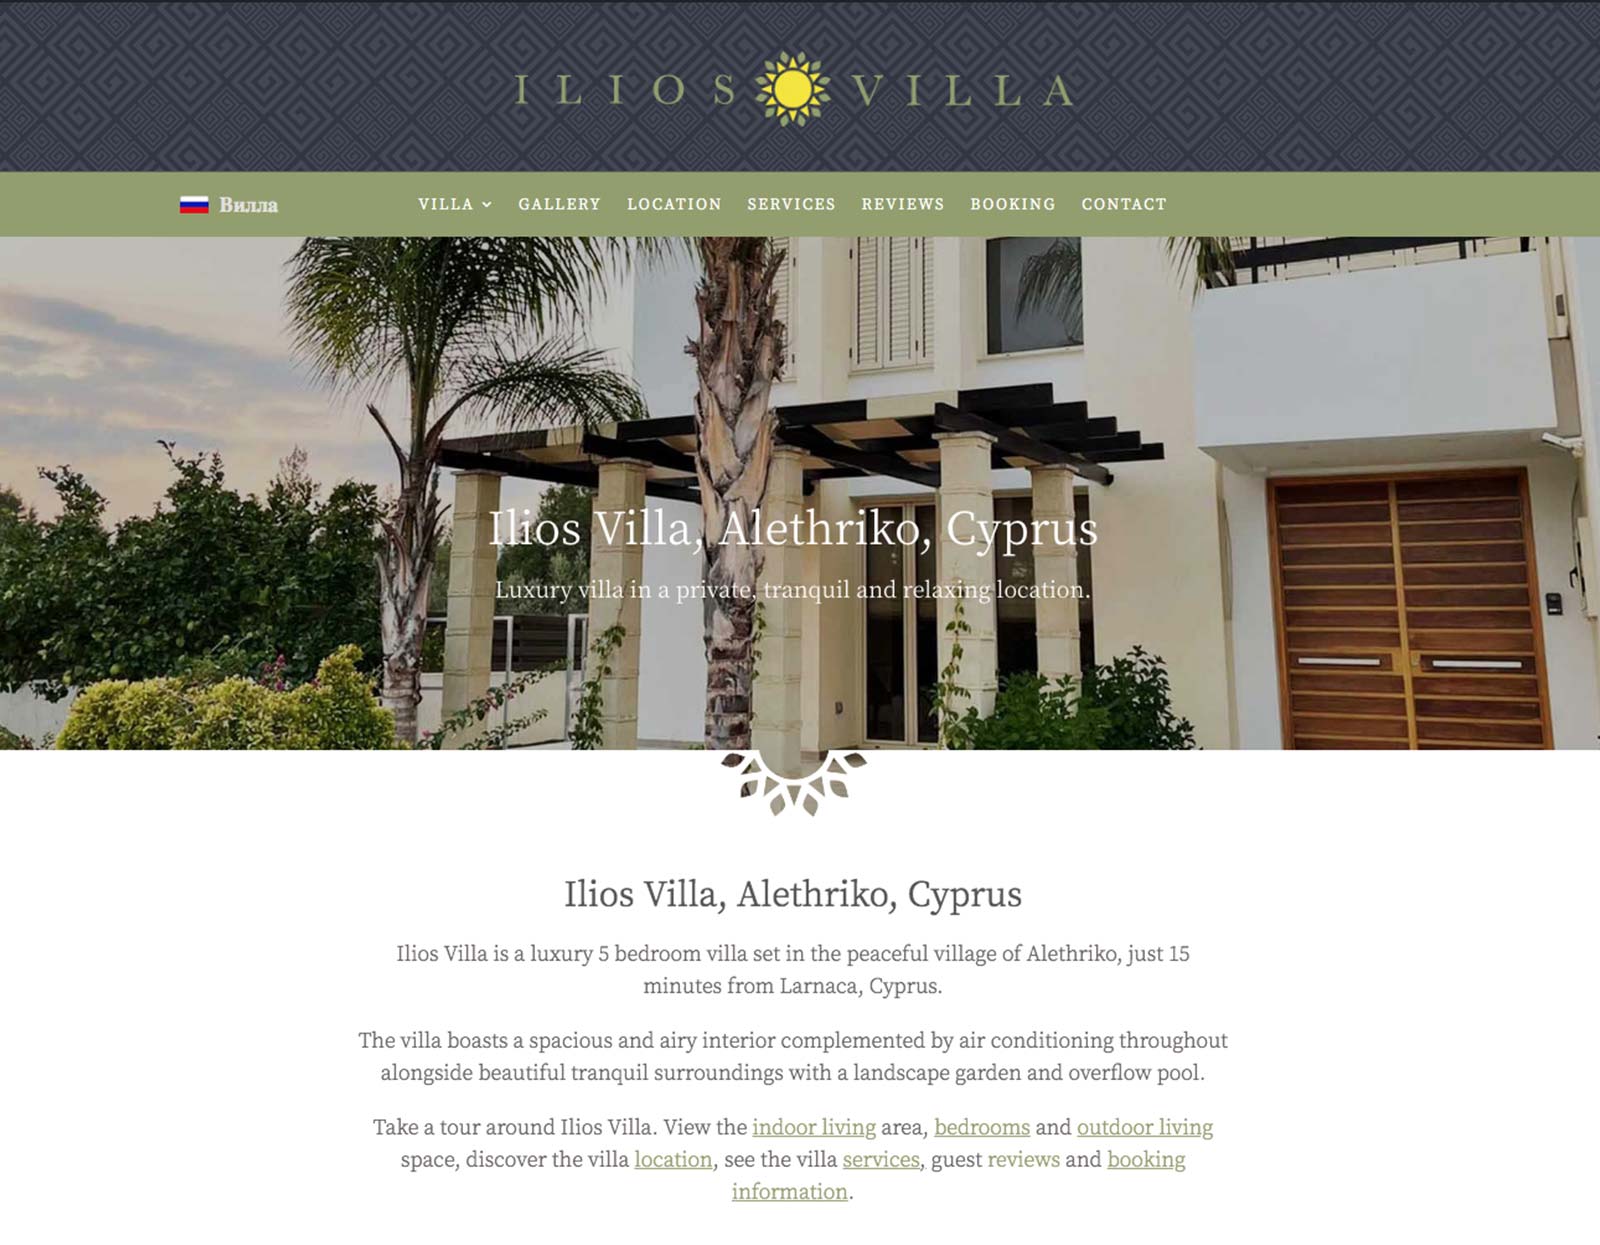 Image of web design for Ilios Villa, Cyprus, showing the website home page.